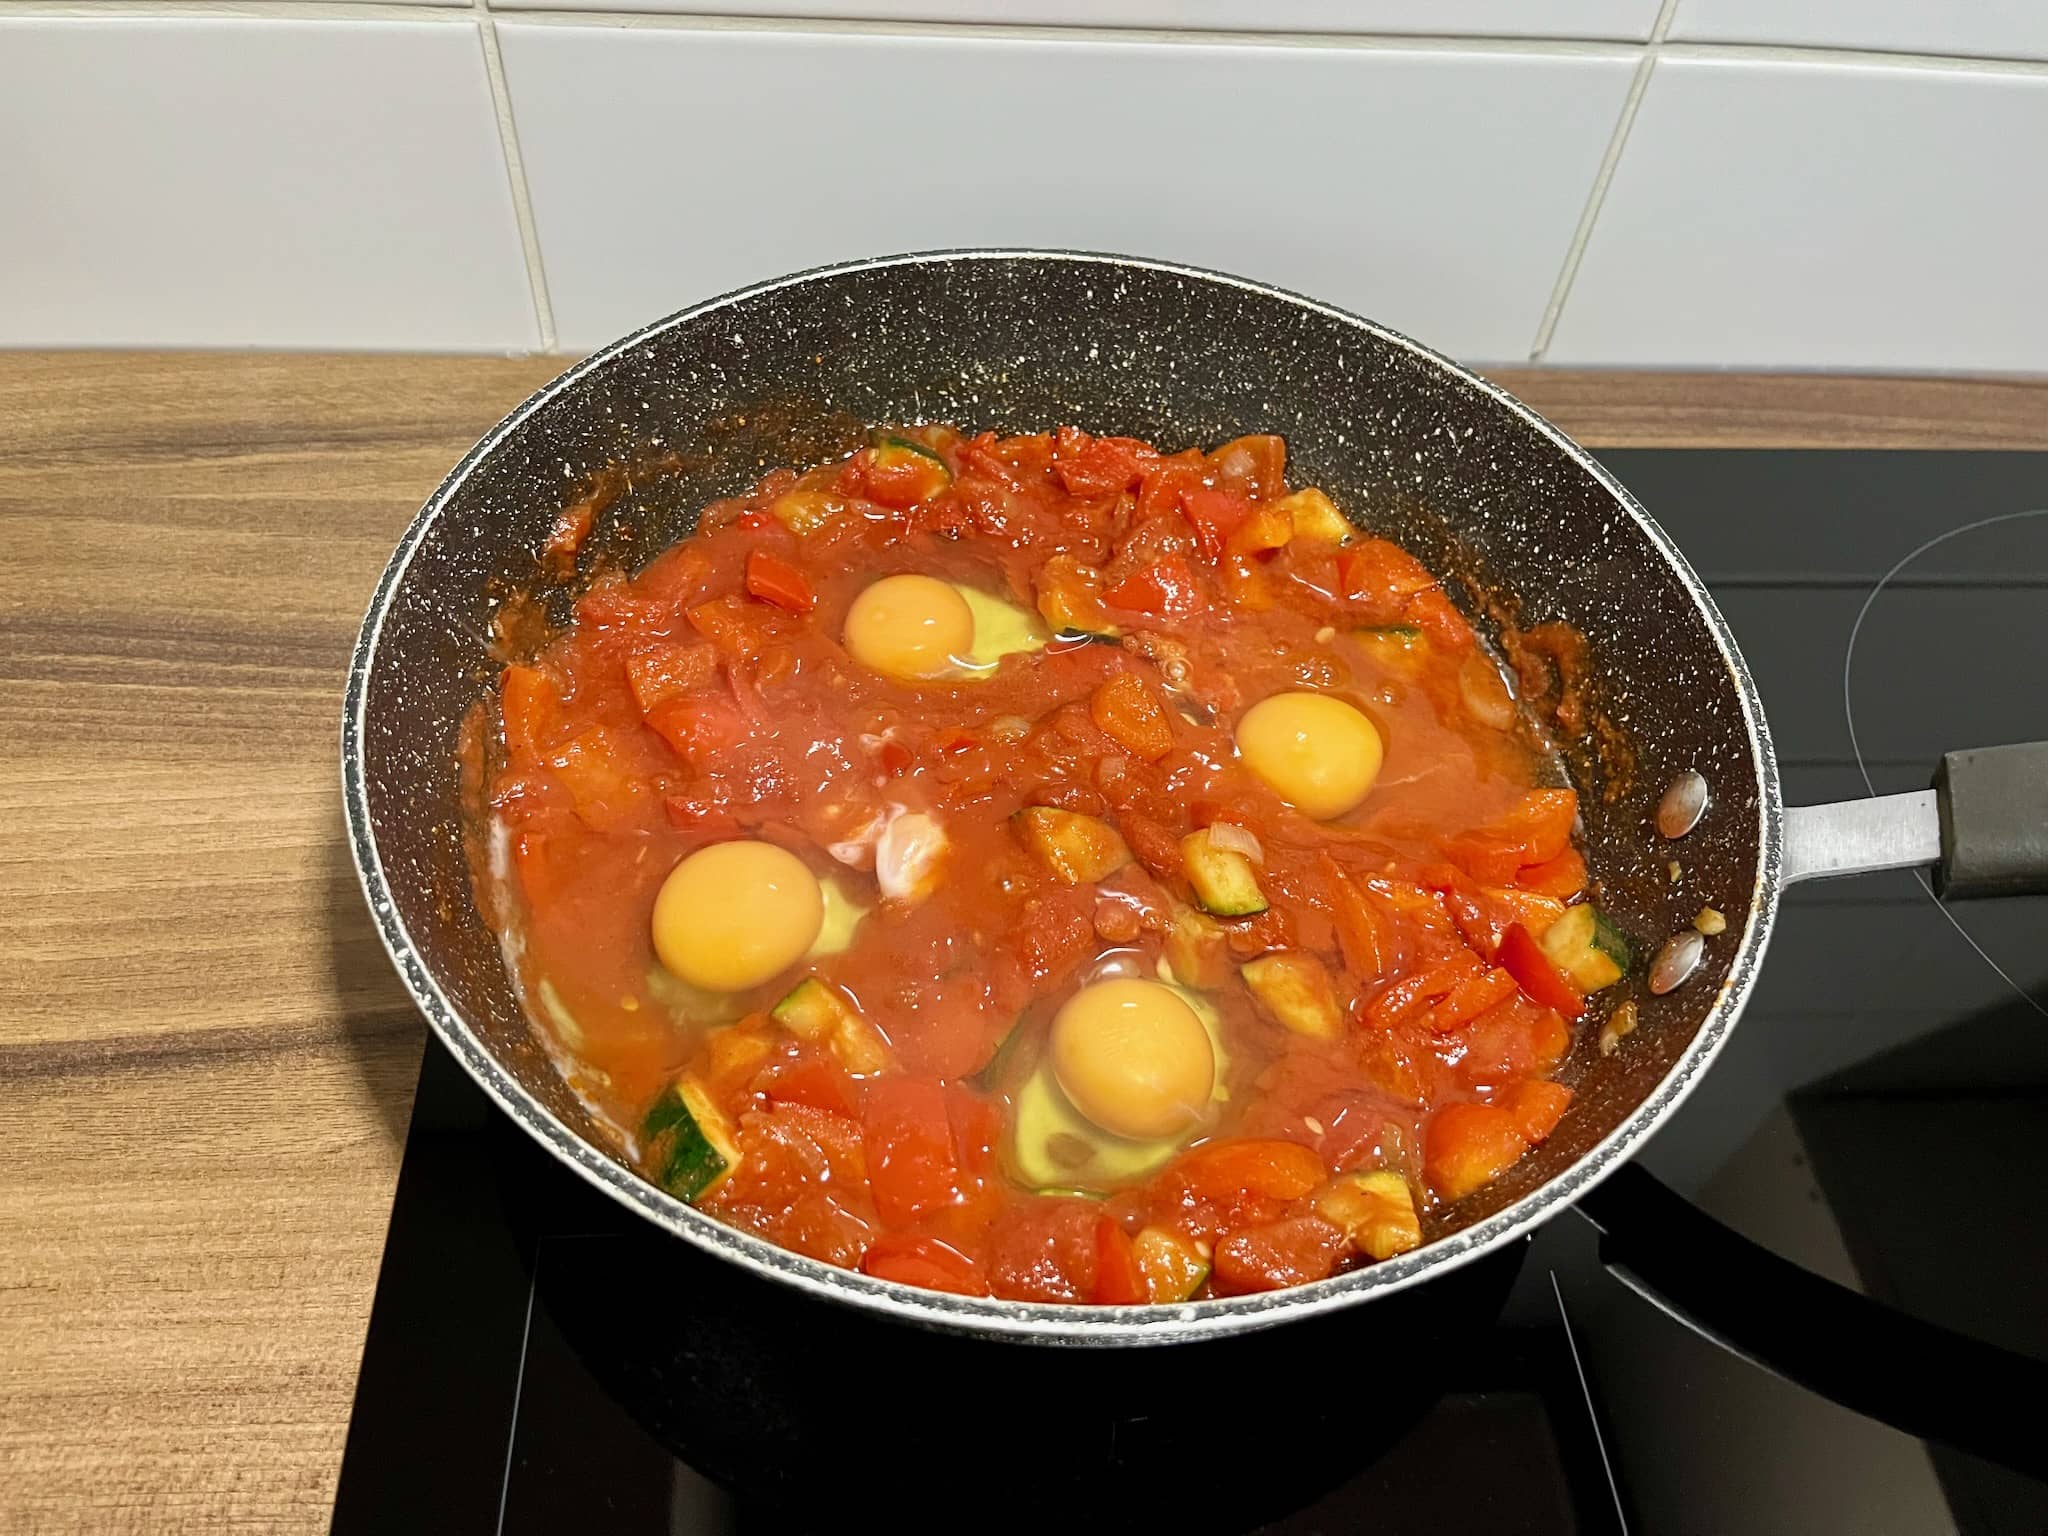 Eggs cracked into four wells in a pan